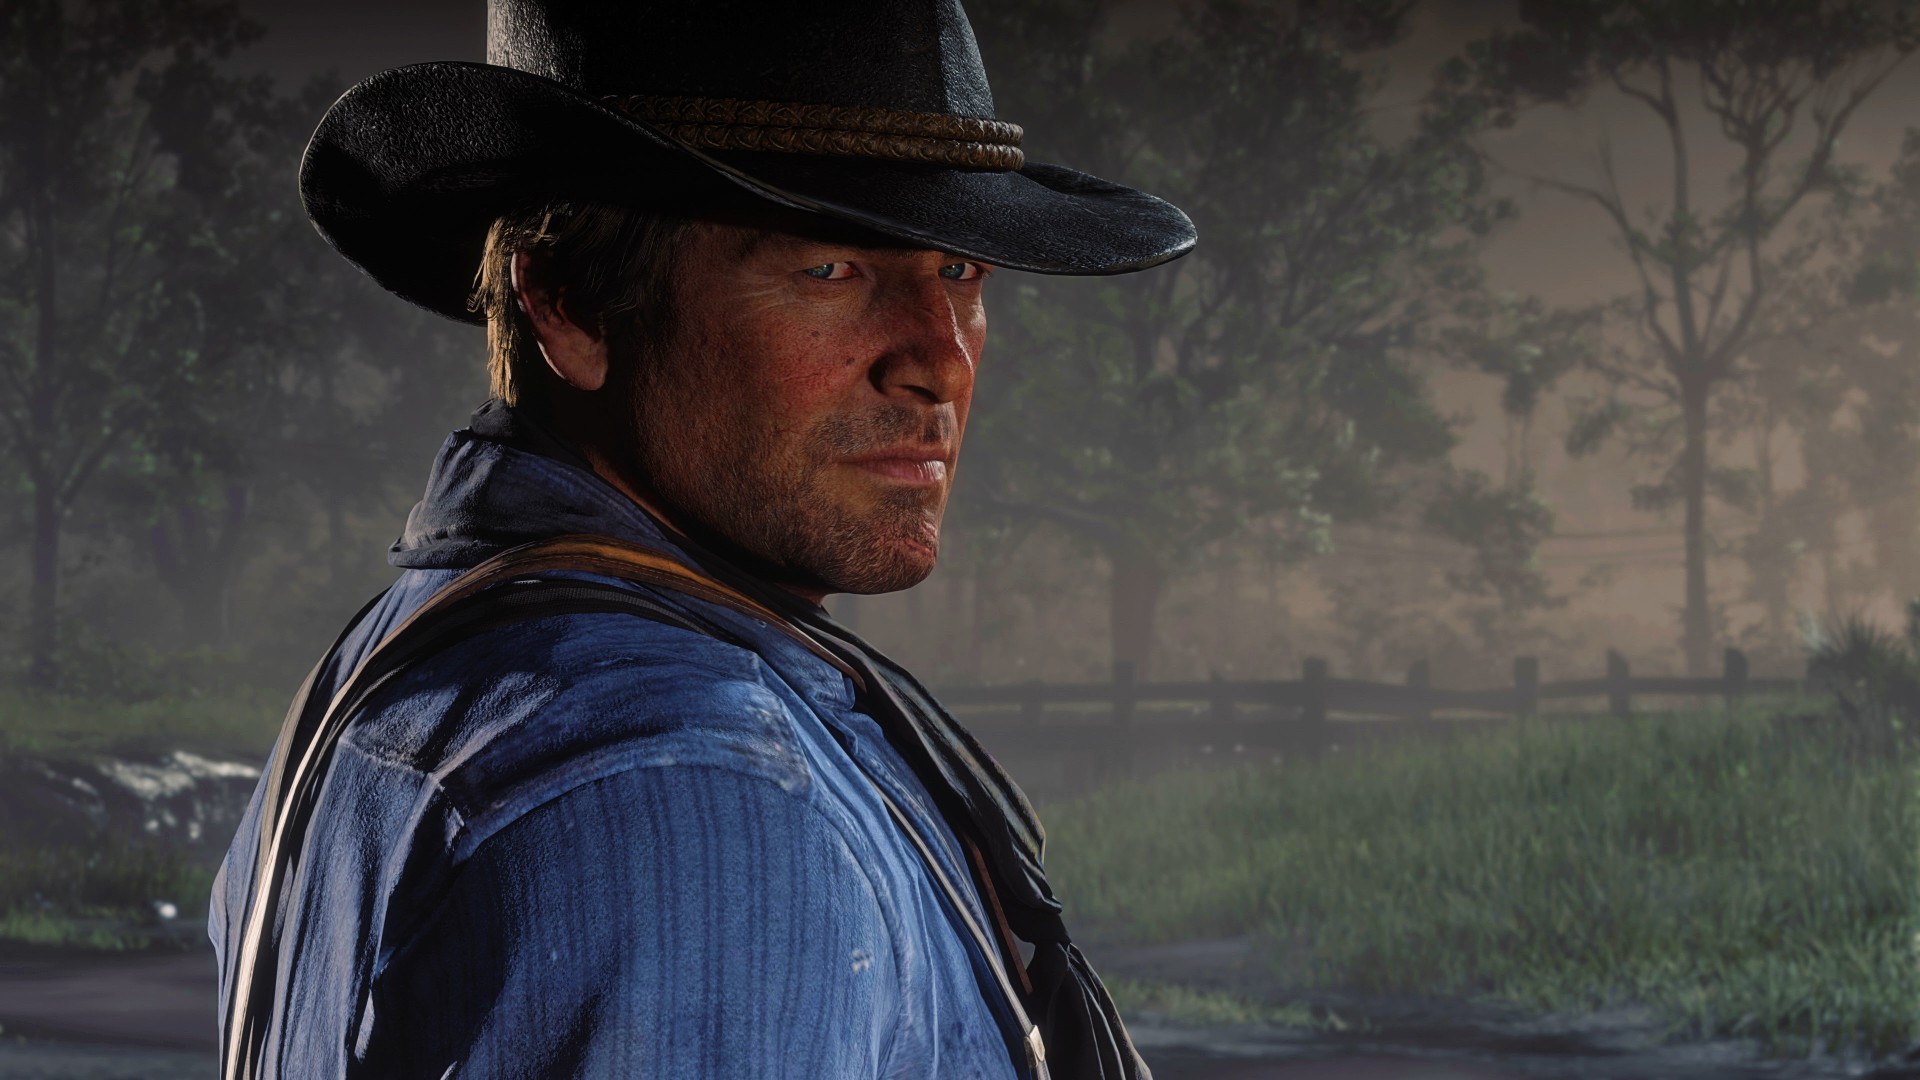 This Red Dead Redemption 2 mod features some Red Dead Online's best items | PCGamesN